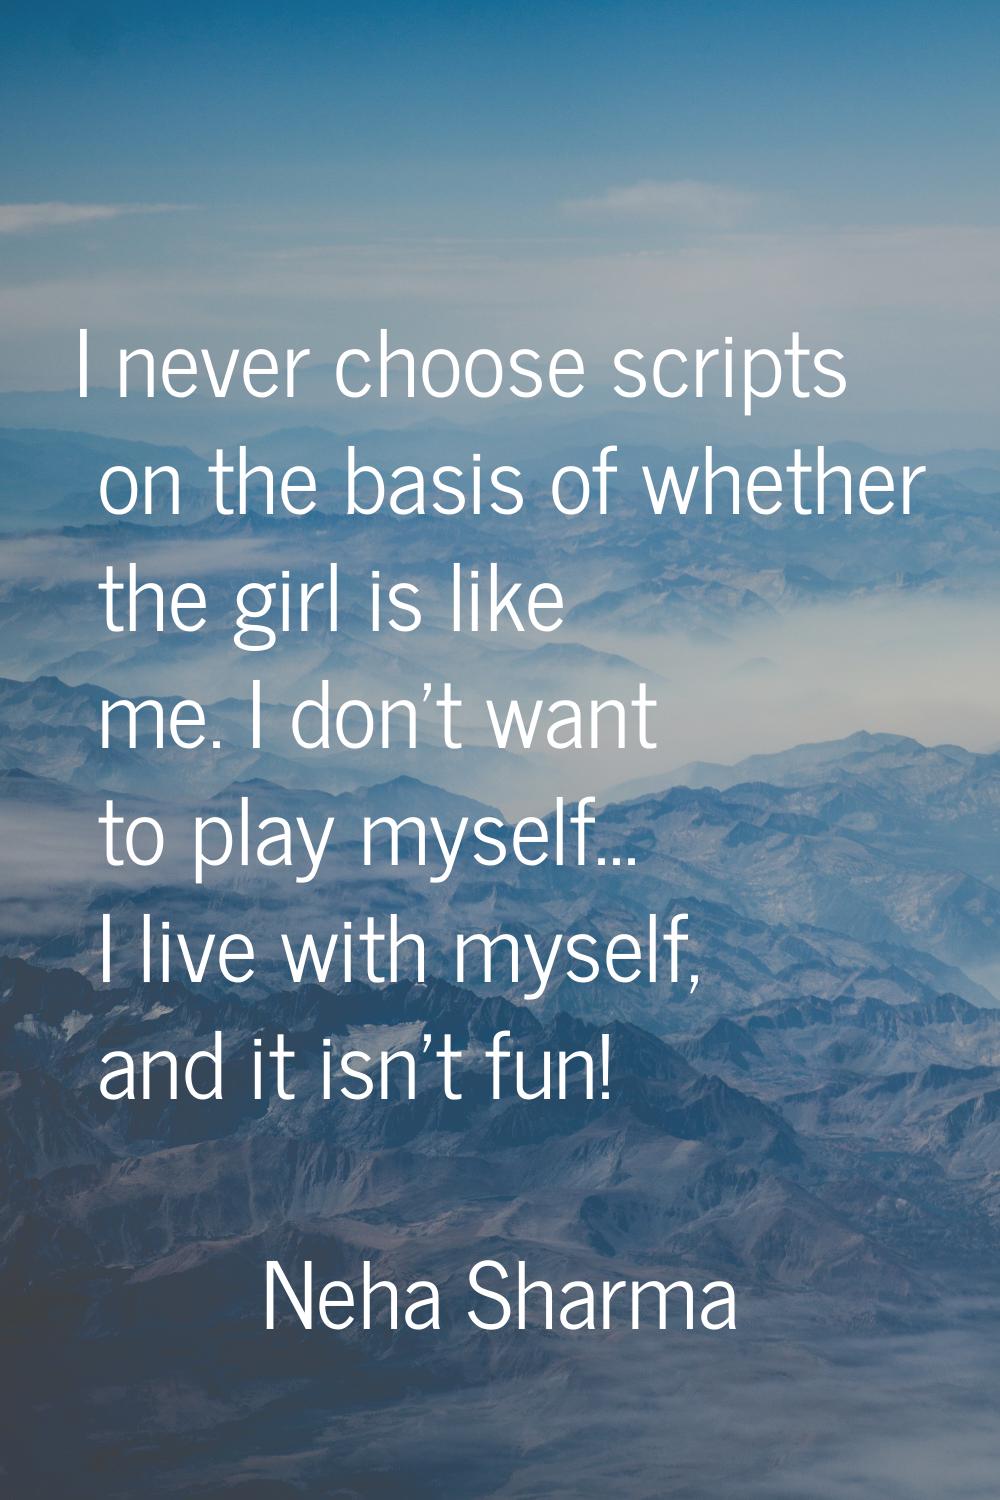 I never choose scripts on the basis of whether the girl is like me. I don't want to play myself... 